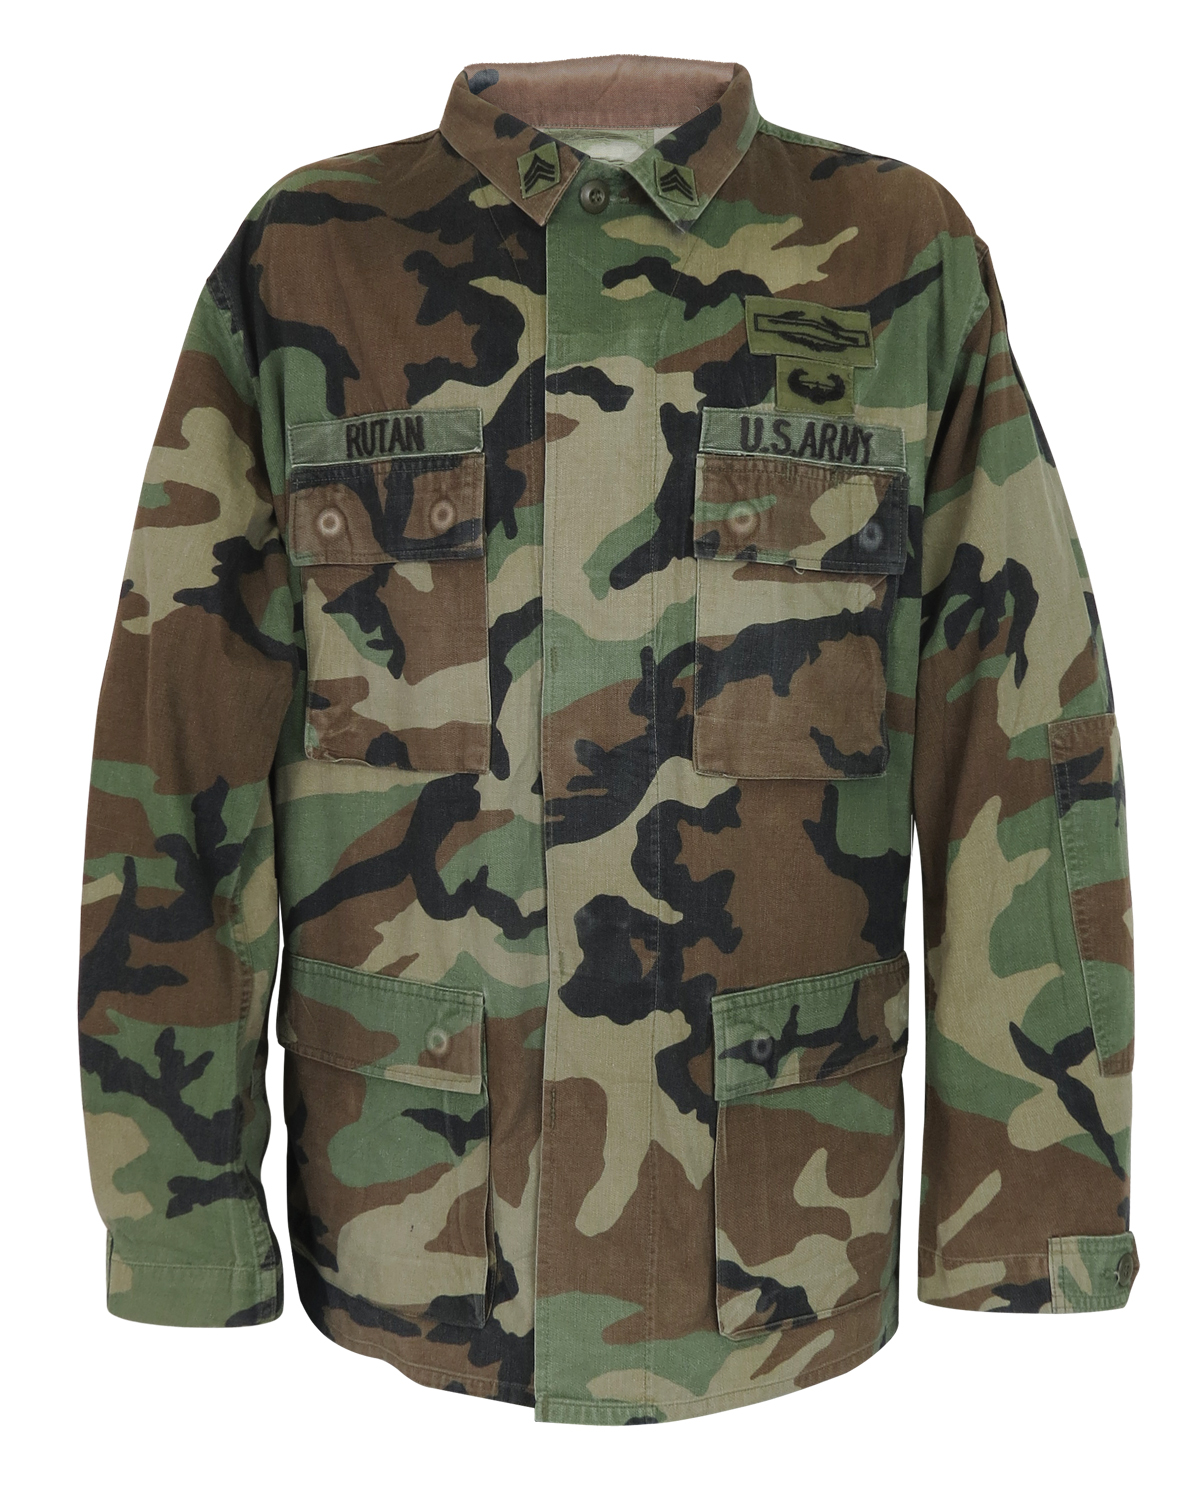 BDU JACKET IN AMERICAN ARMY STYLE FOR KIDS Mil-Tec® WOODLAND | tyello.com